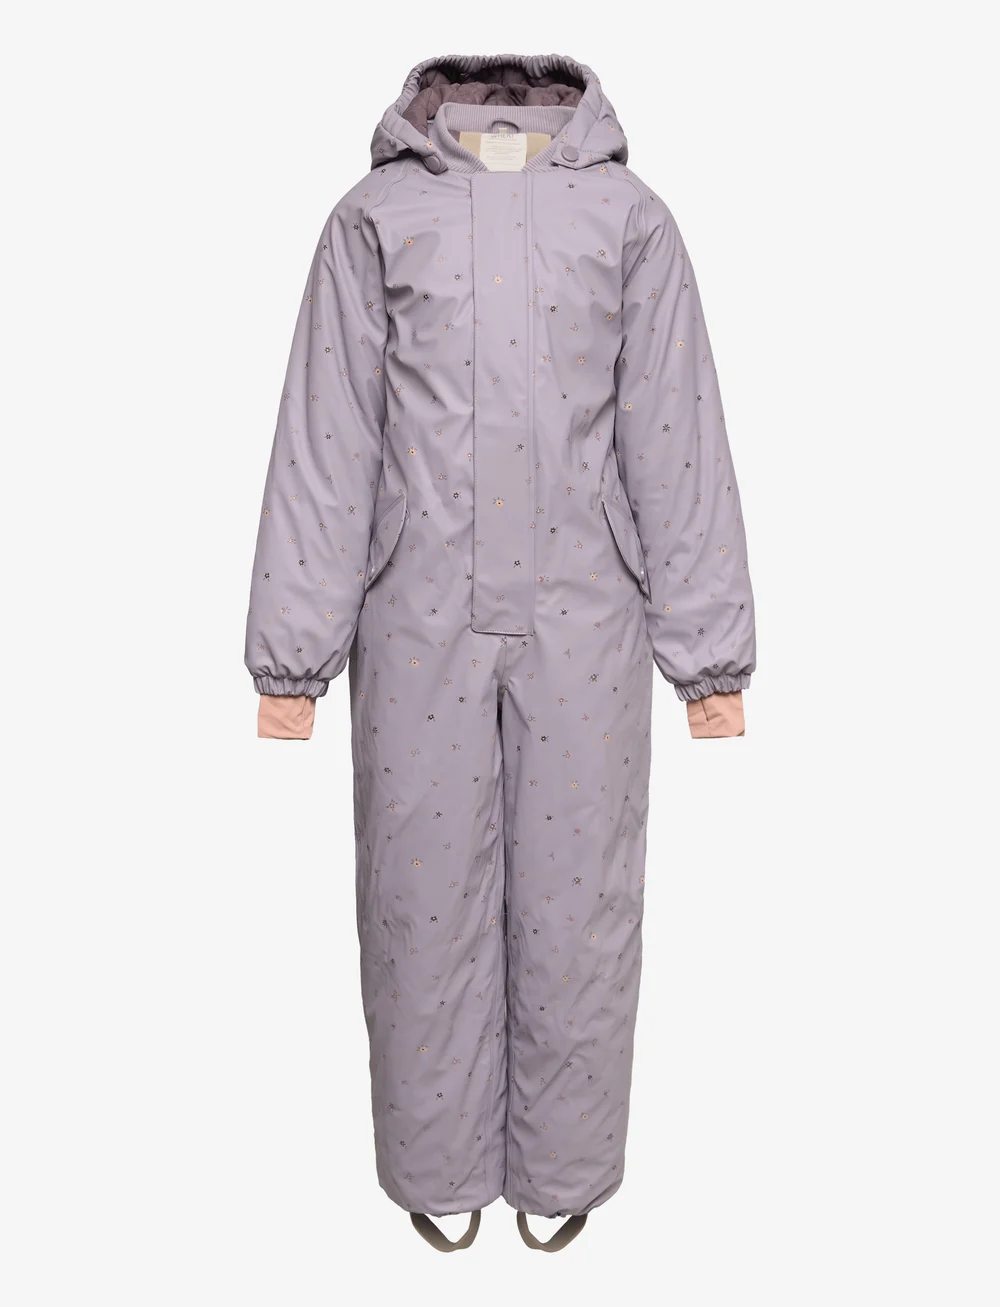 Wheat Wintersuit Ludo - 169.95 €. Buy Coveralls from Wheat online at  Boozt.com. Fast delivery and easy returns